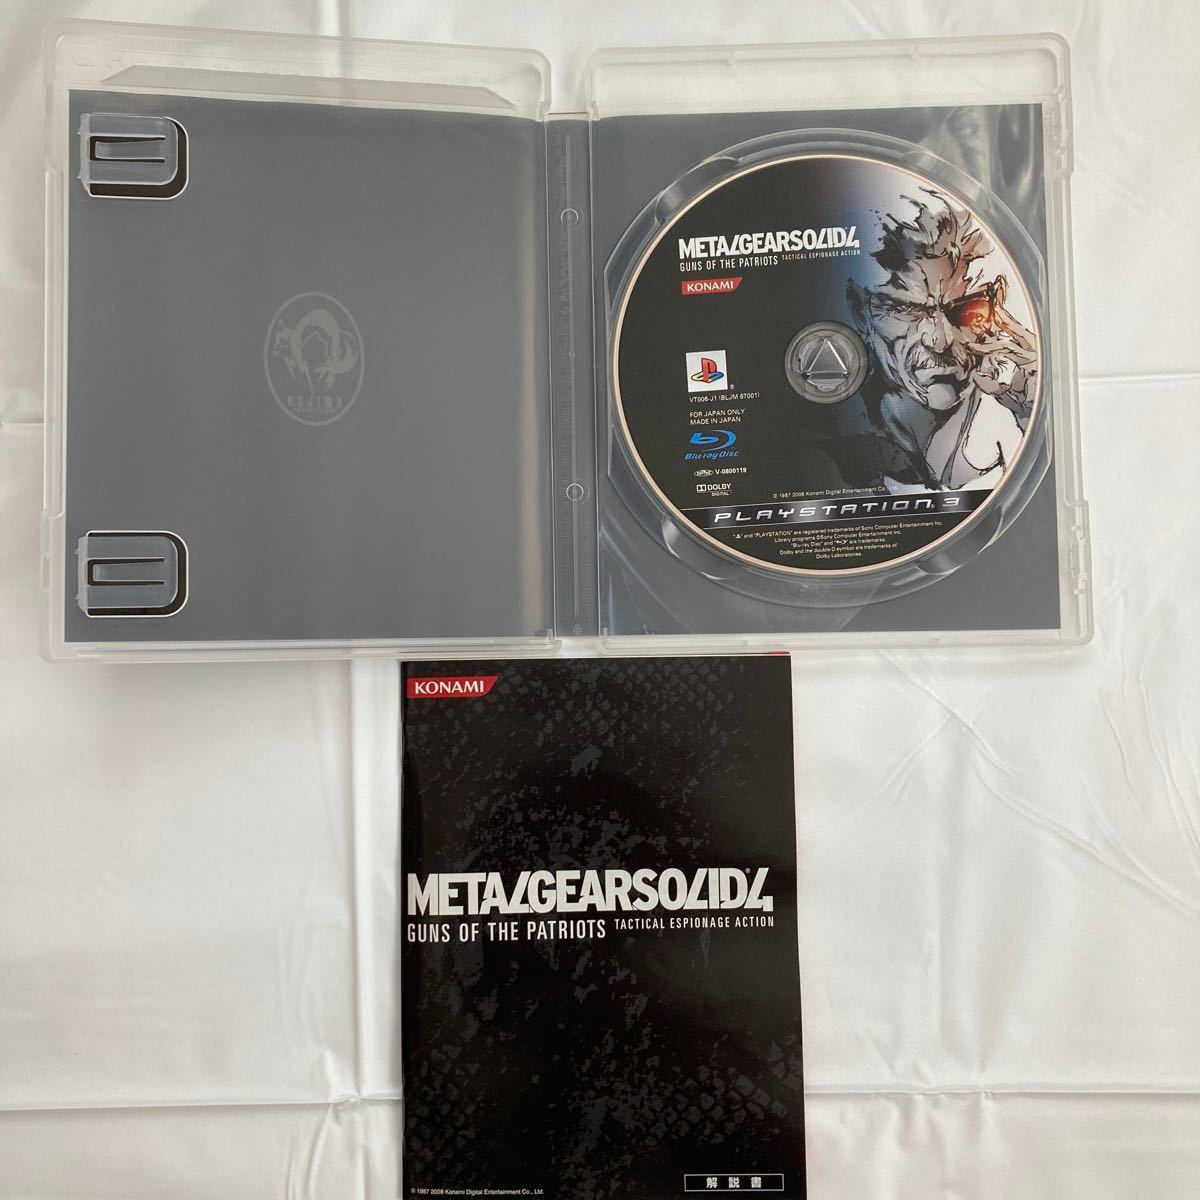 PlayStation3 中古ソフト 3本セット